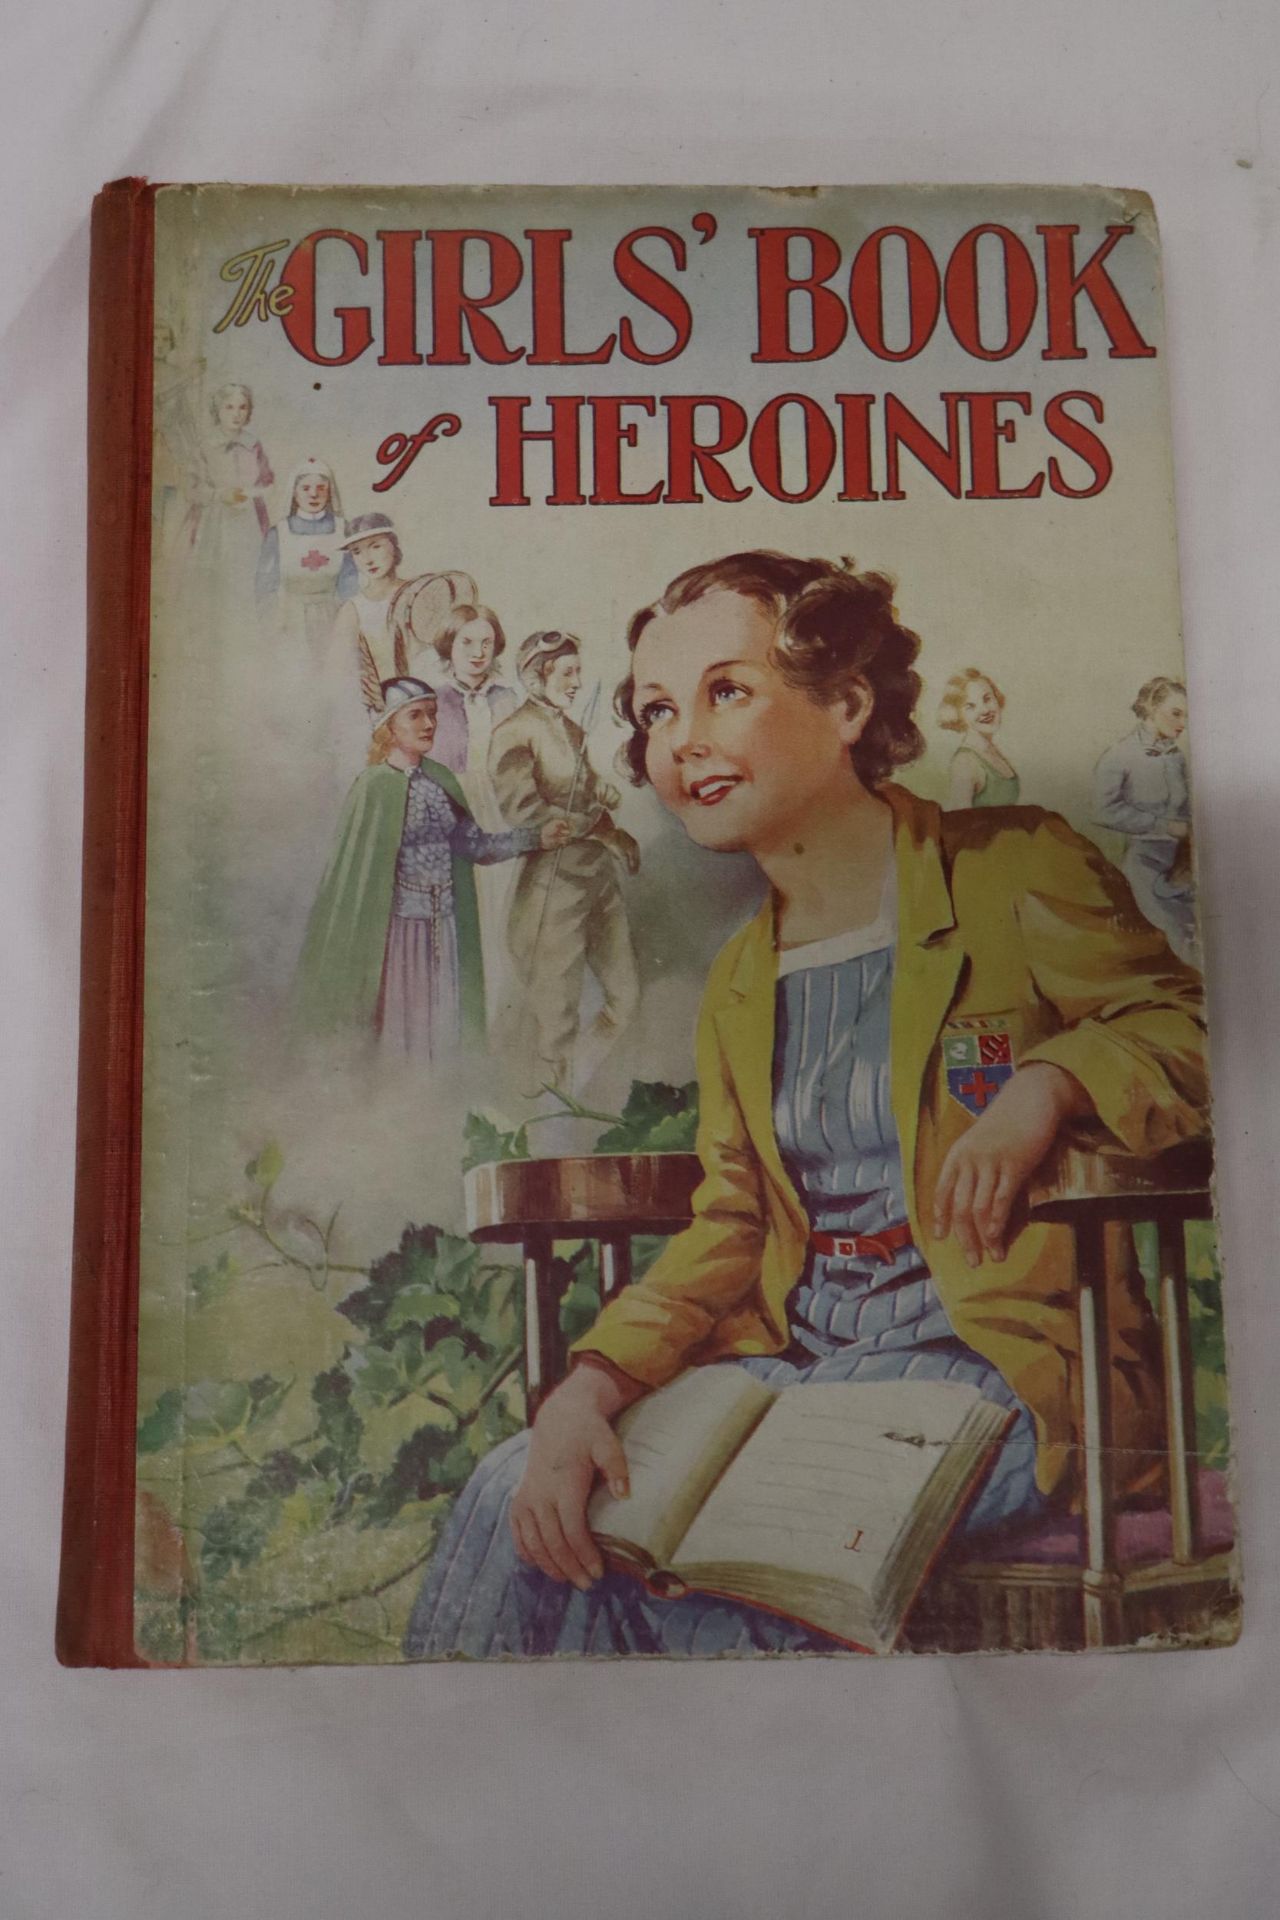 TWO VINTAGE HARDBACK CHILDREN'S BOOKS, 'THE GIRL'S BOOK OF HEROINES' AND 'LAMB'S TALES FROM - Bild 5 aus 8